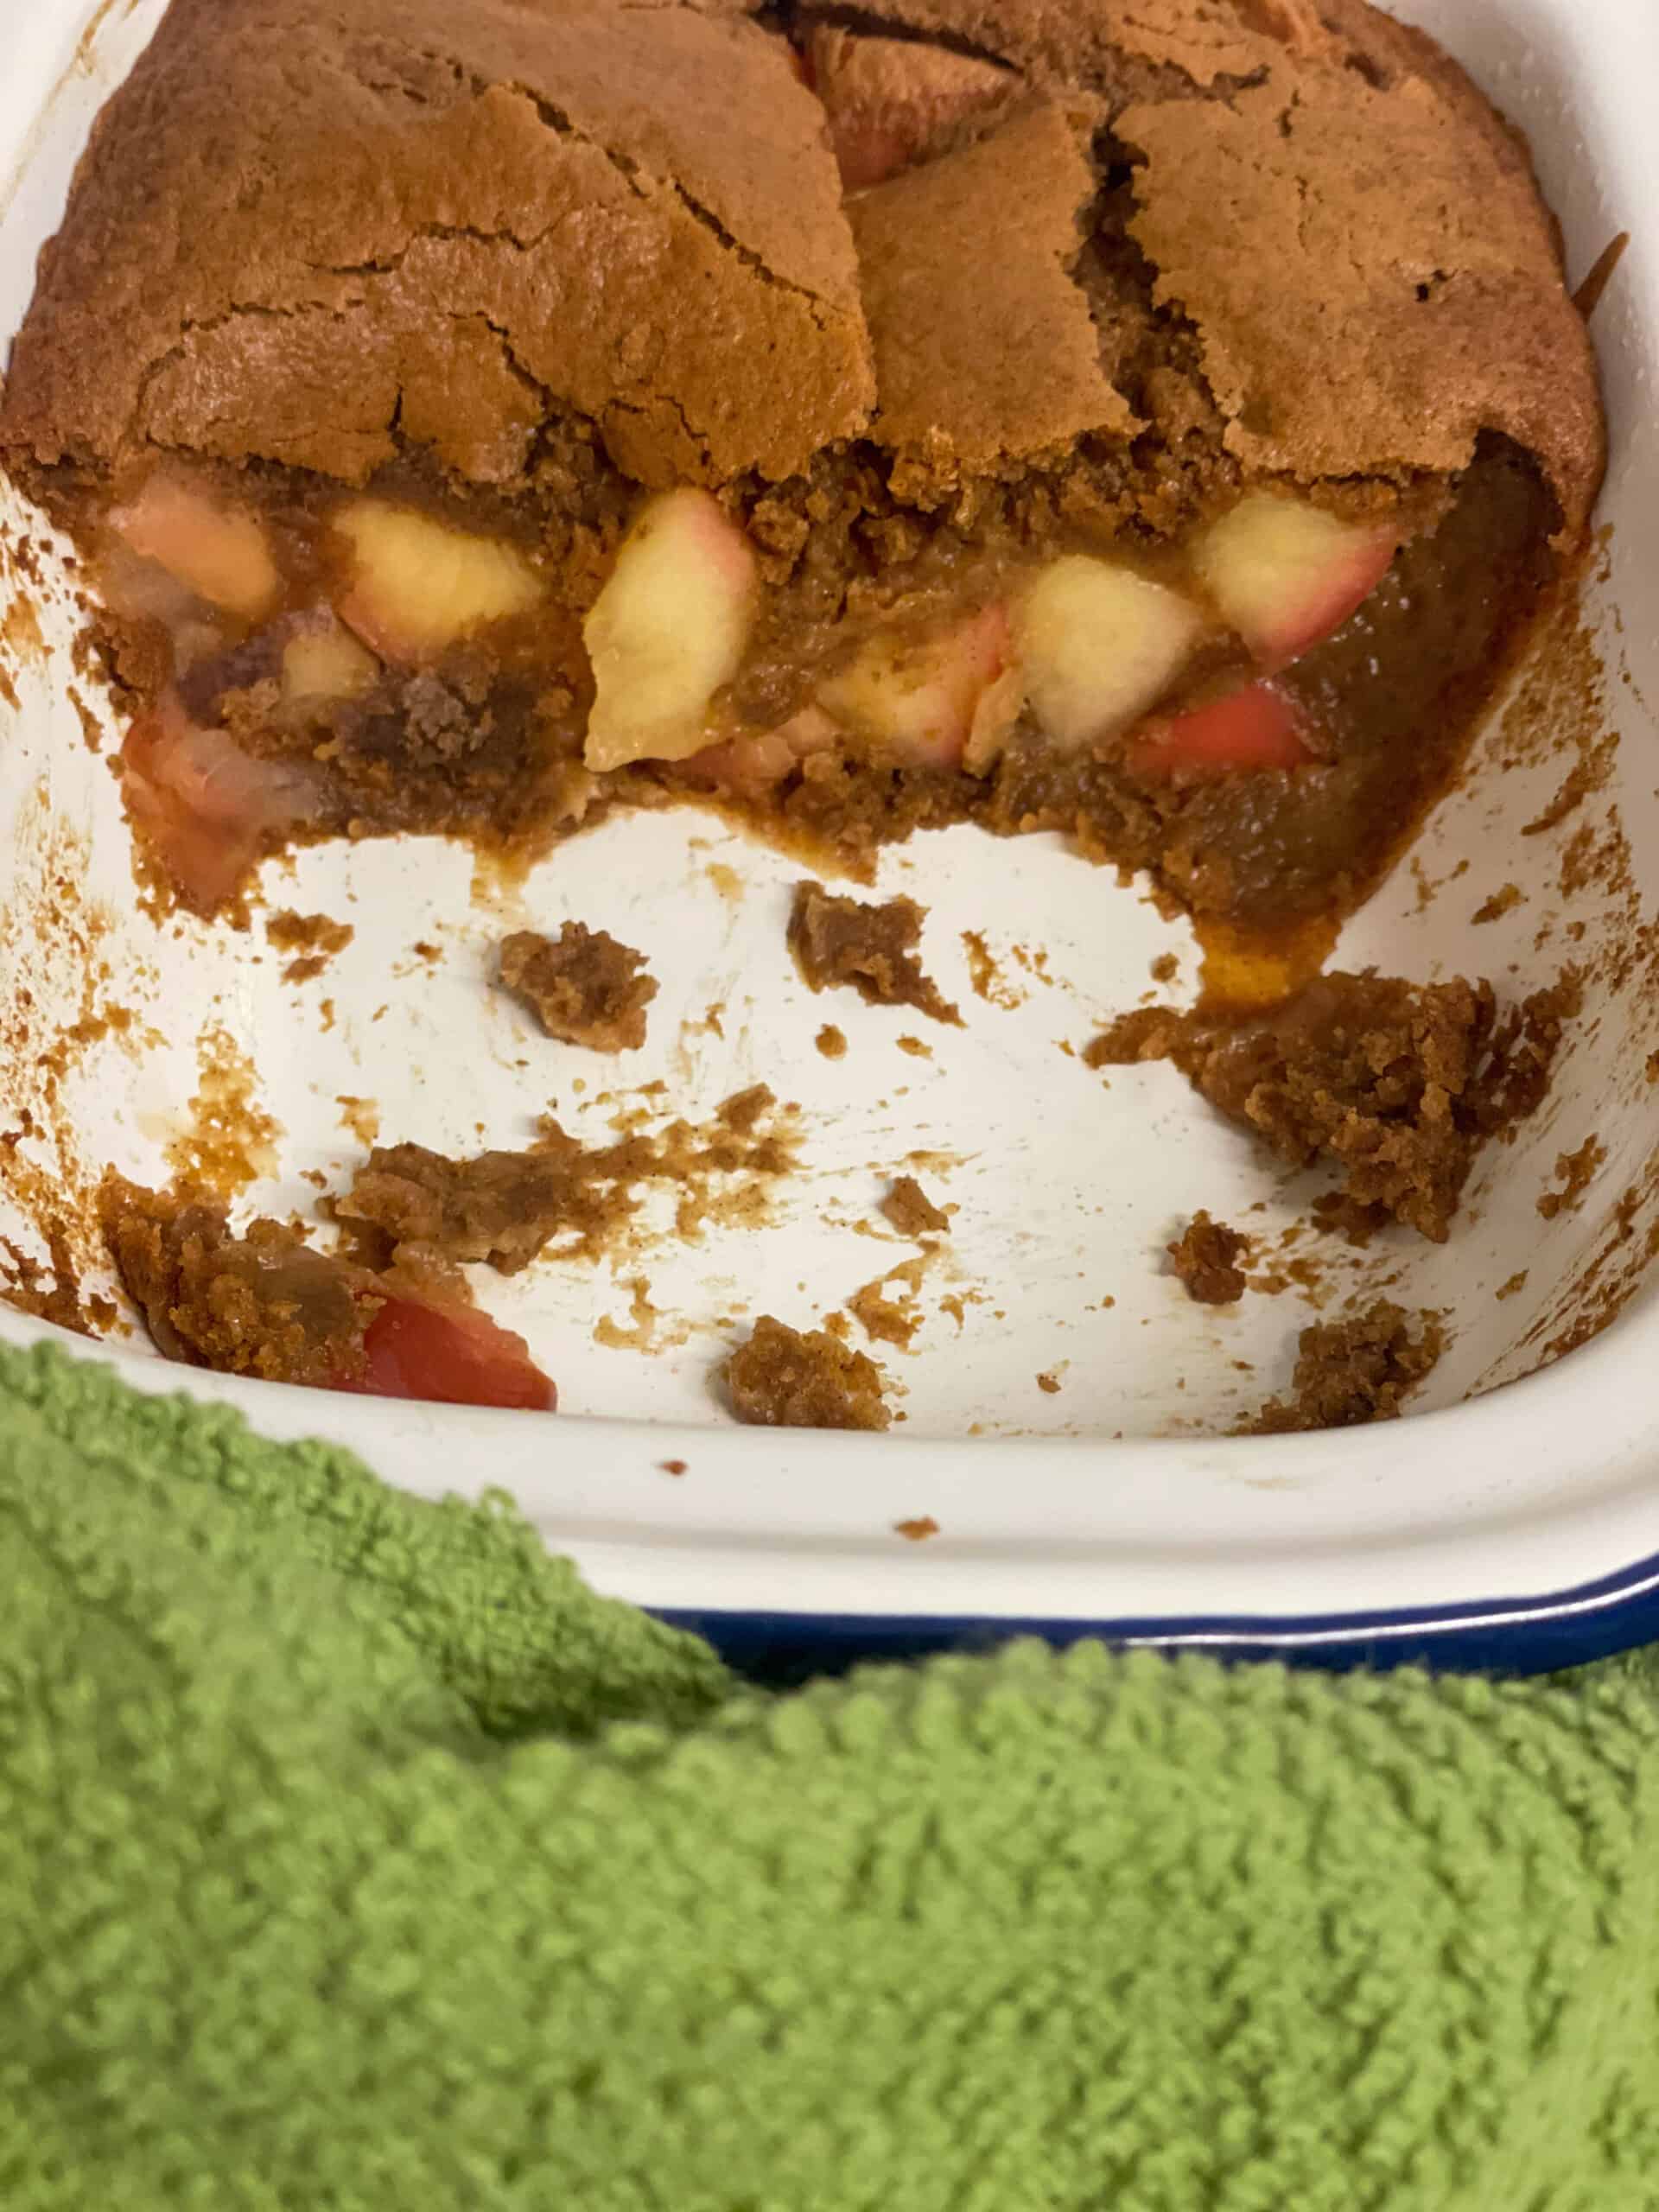 Eve's pudding with half removed from dish, green tea cloth background.